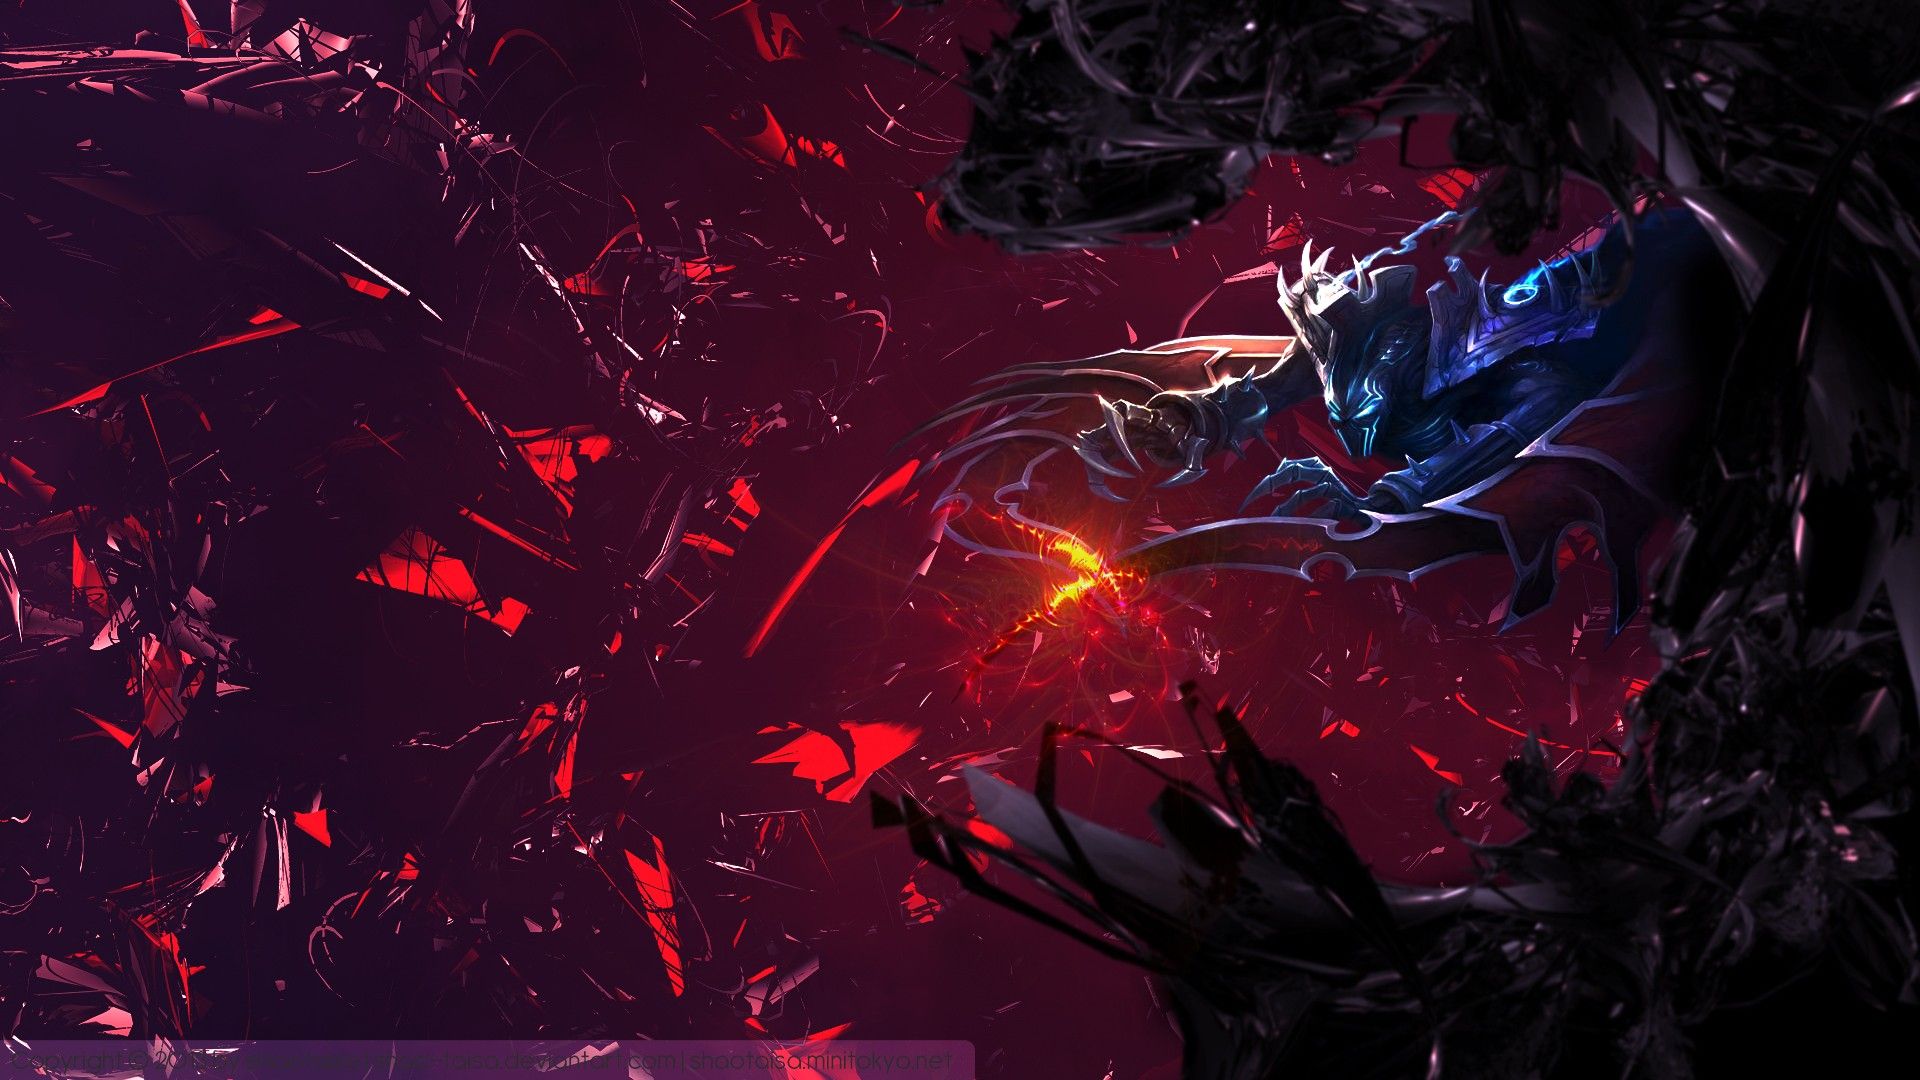 Abstract, video games, League of Legends, Nocturne, Game